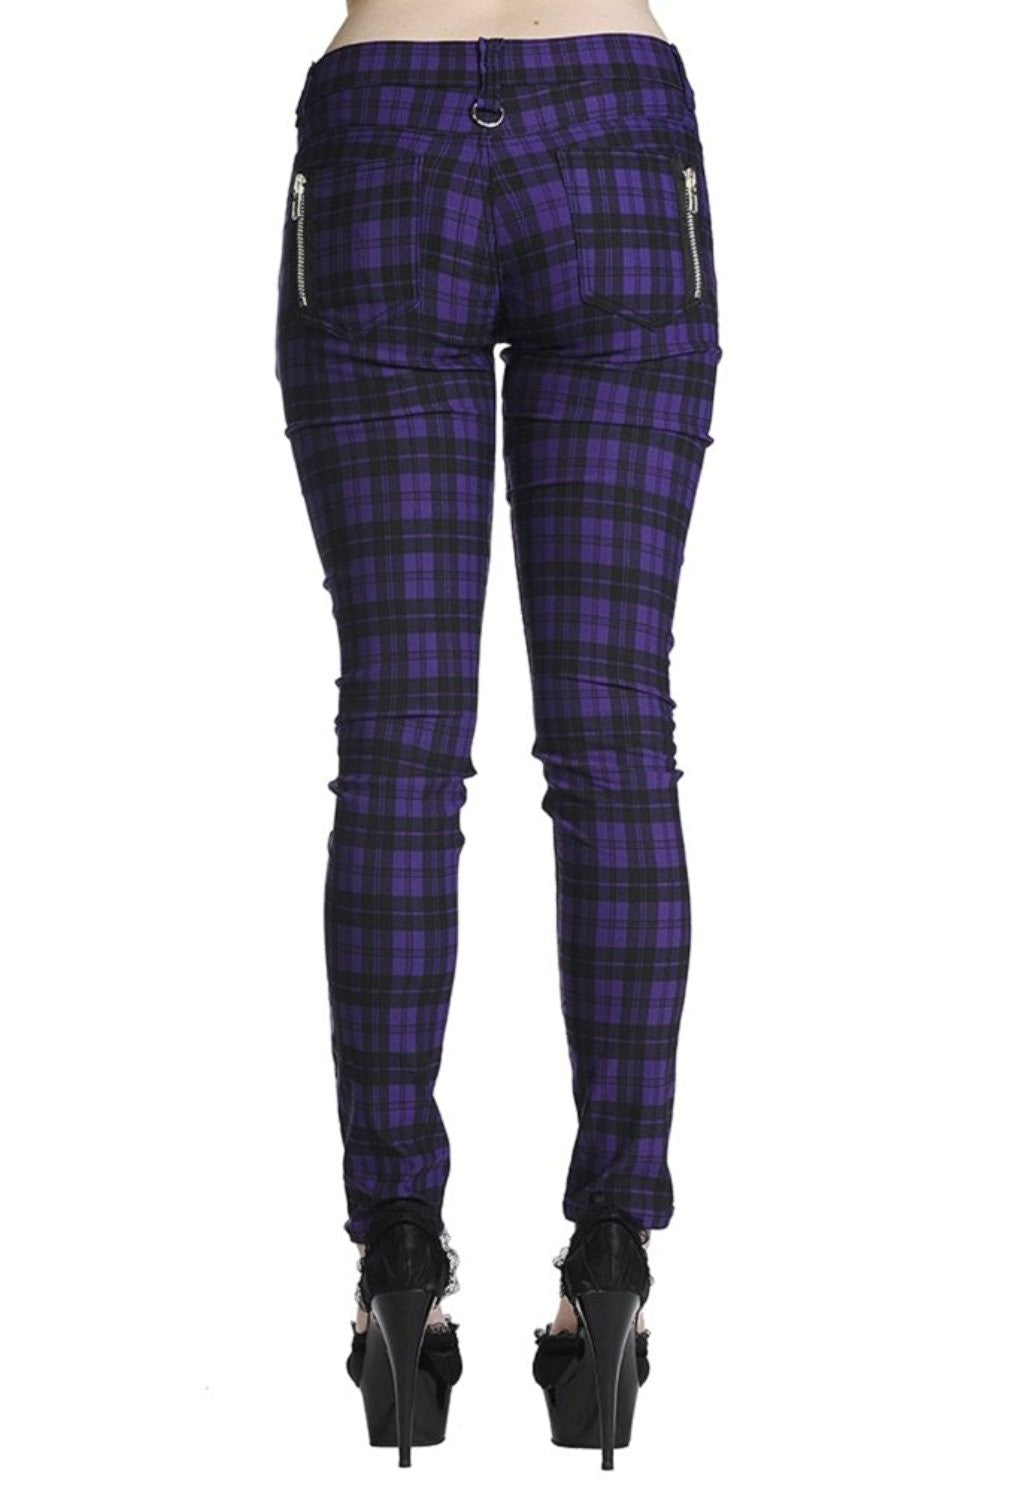 Banned Plaid Check Punk Skinny Trousers